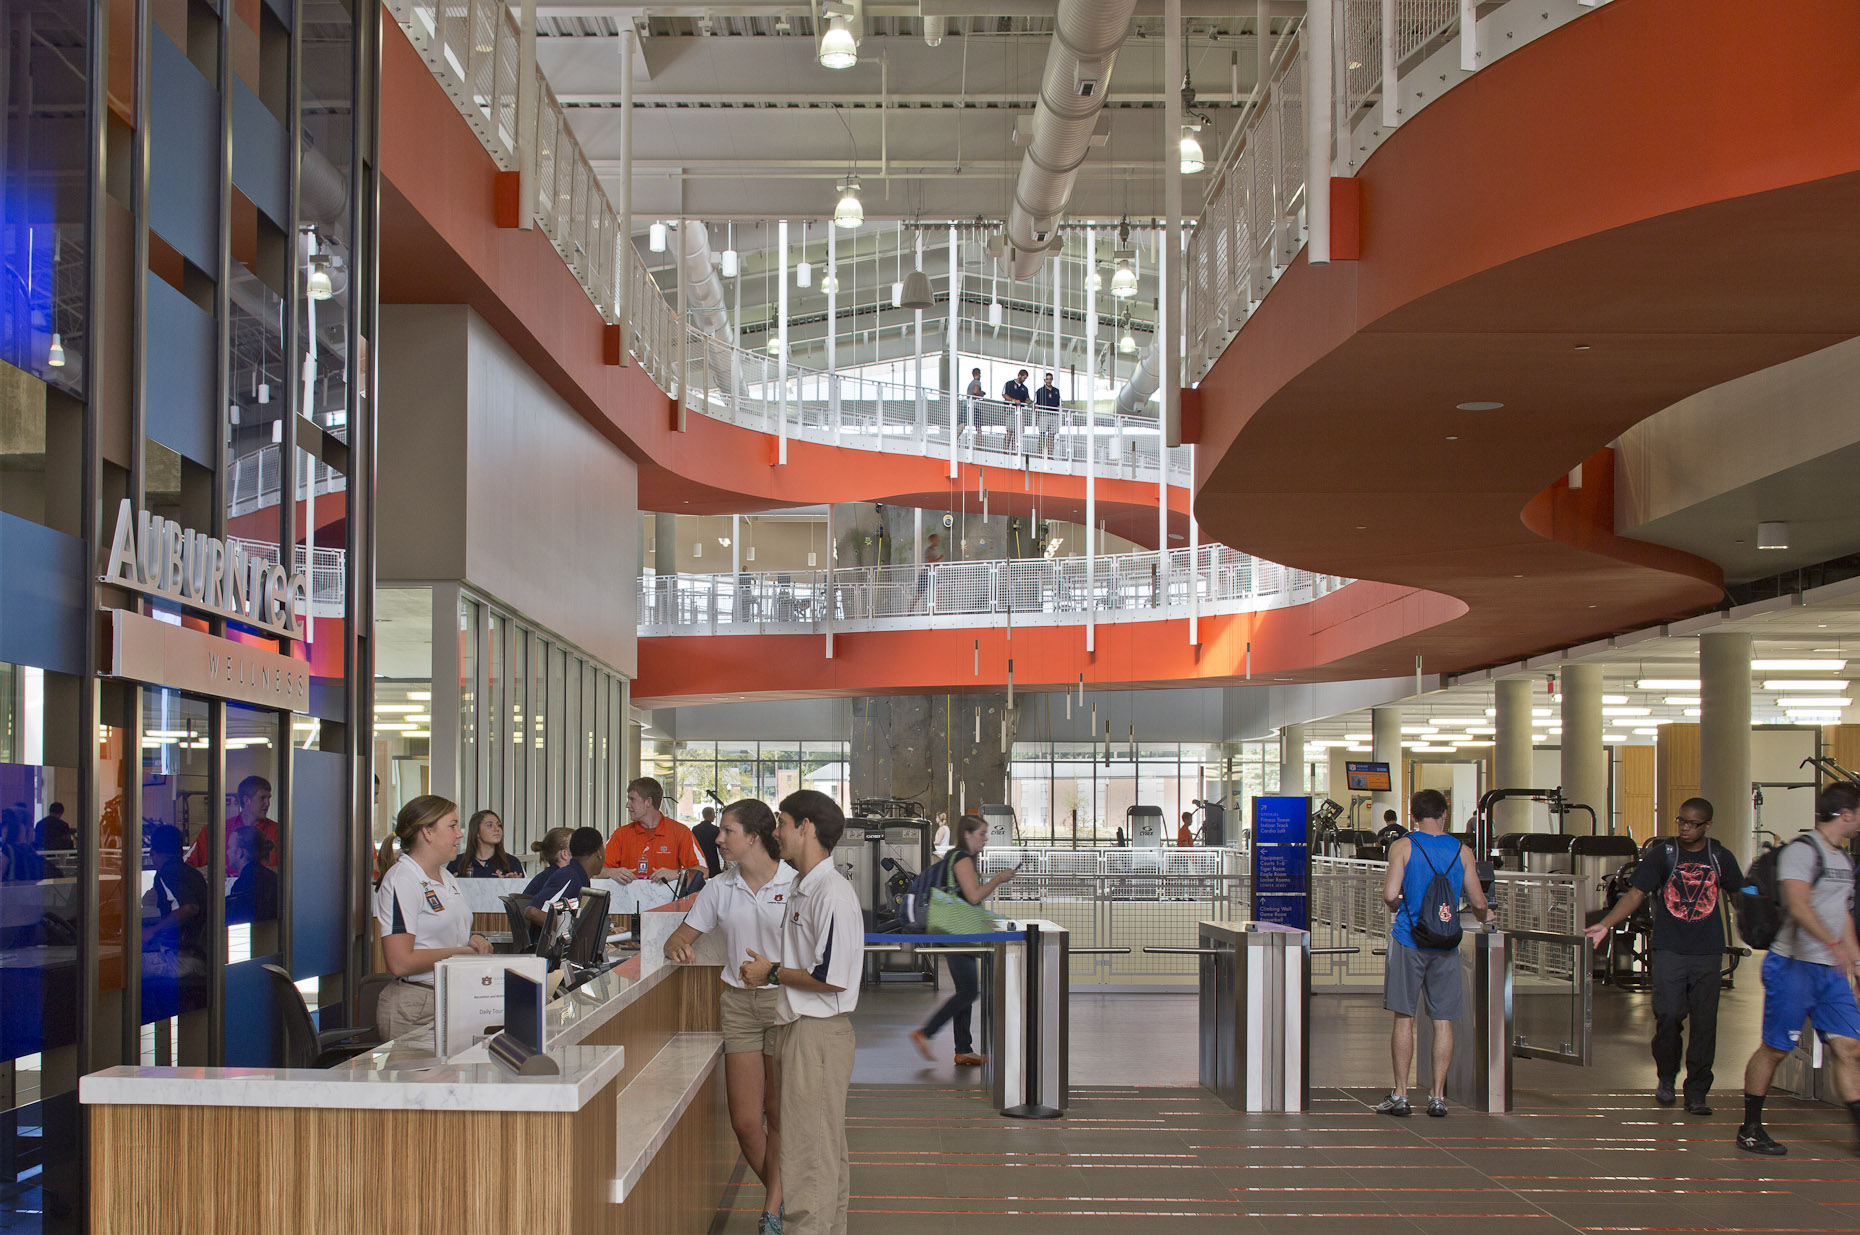 Auburn University Recreation & Wellness Center by 360 Architecture Photographed by Brad Feinknopf based in Columbus, Ohio